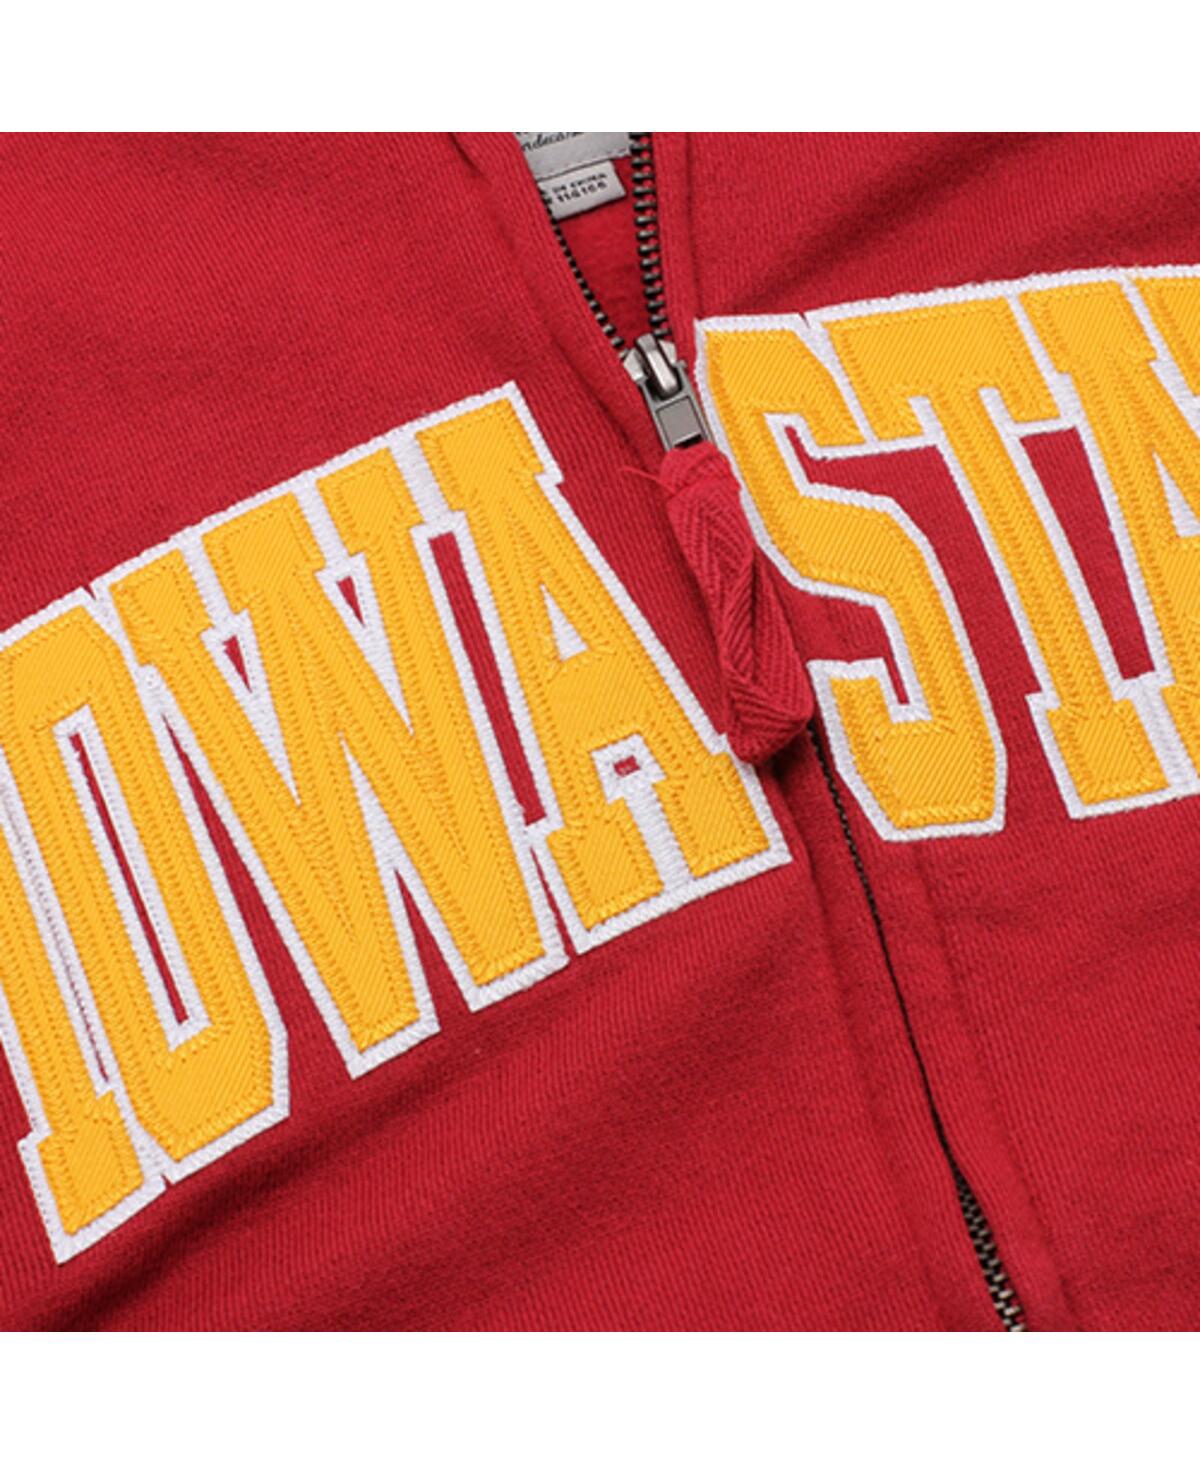 Shop Stadium Athletic Women's  Cardinal Iowa State Cyclones Arched Name Full-zip Hoodie